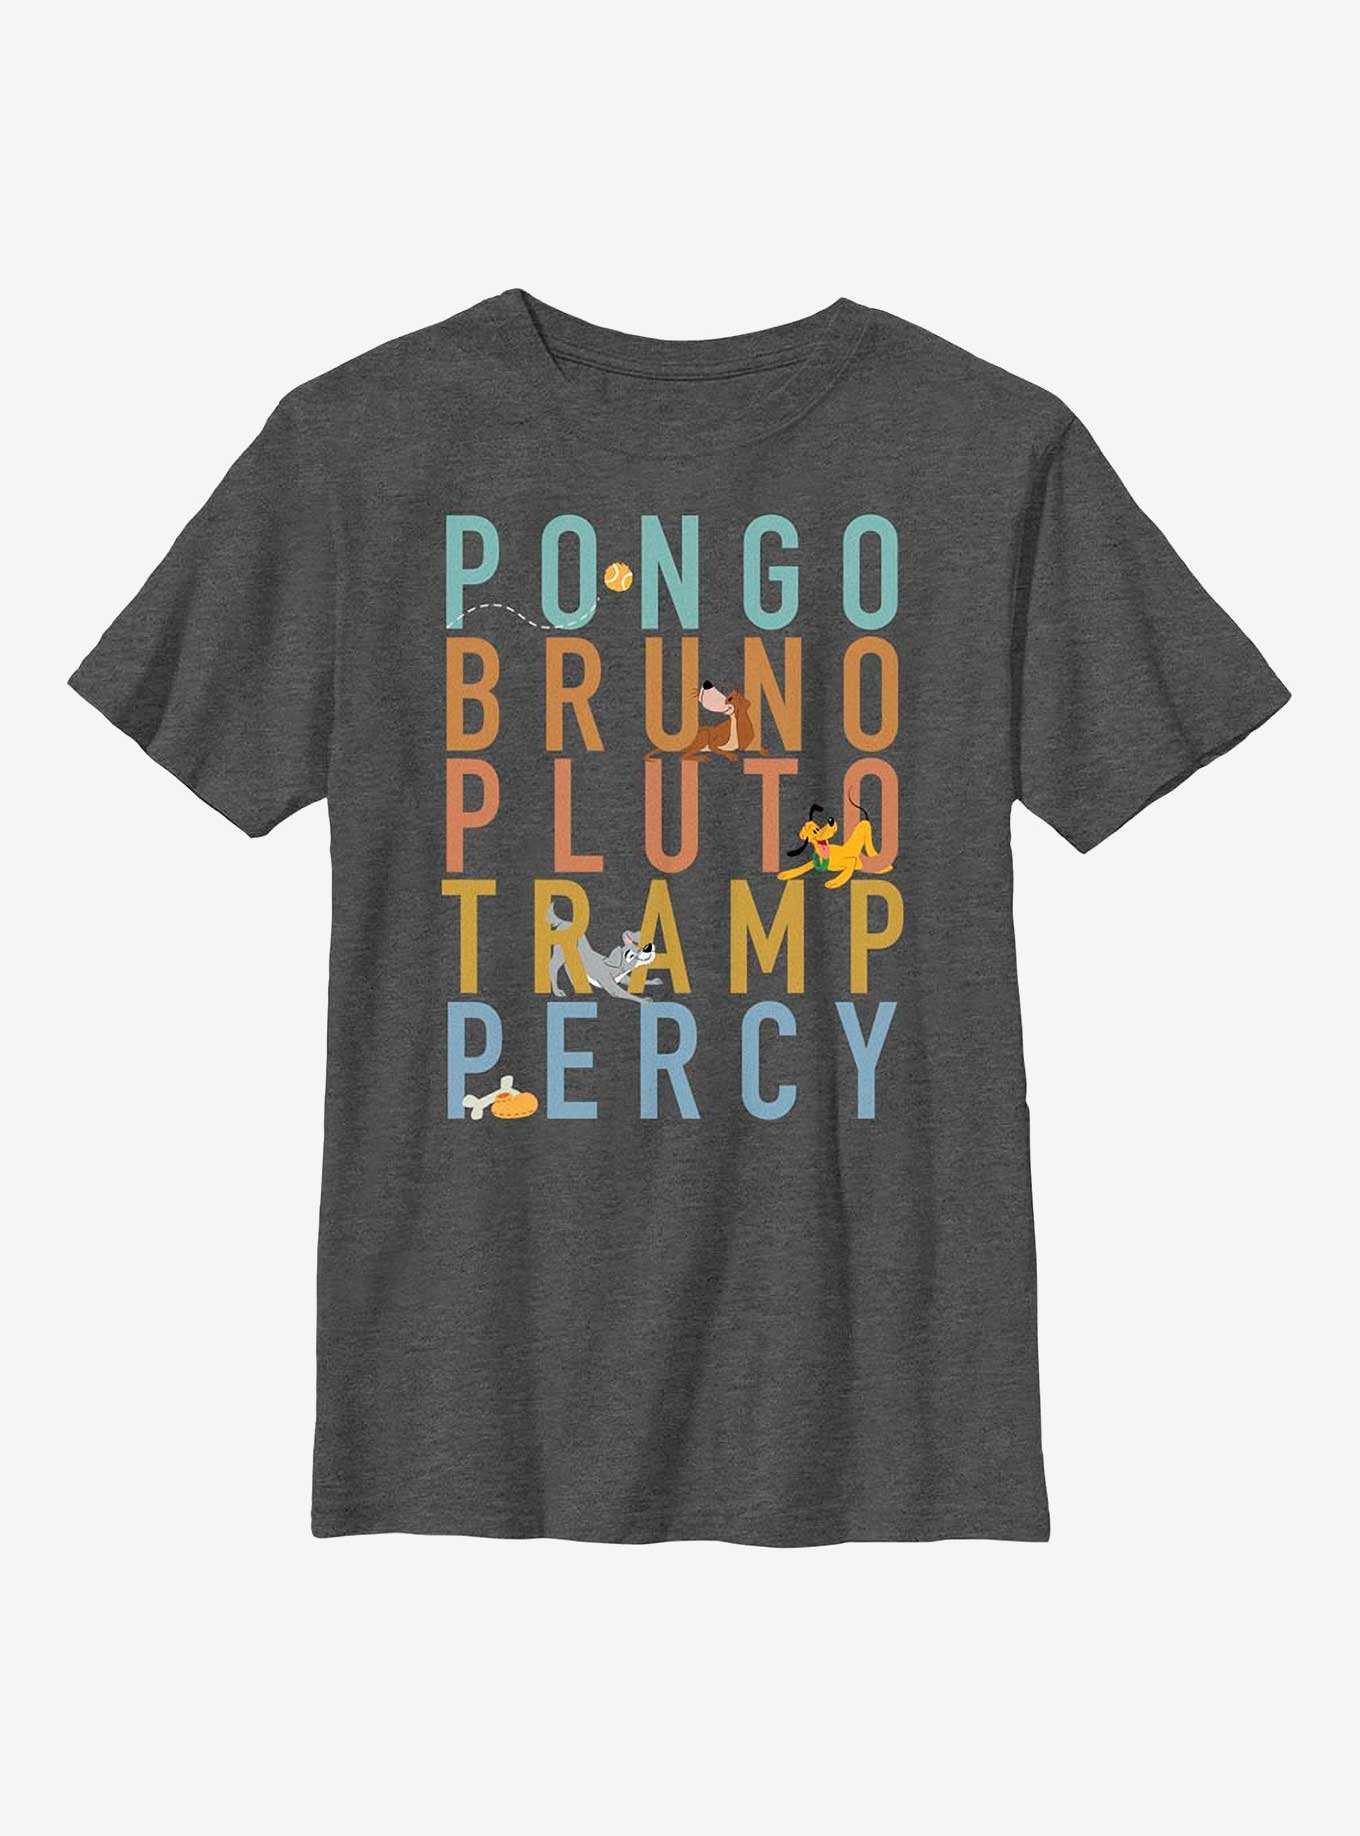 Disney Channel Pongo, Bruno, Pluto, Tramp, Percy Youth T-Shirt, , hi-res